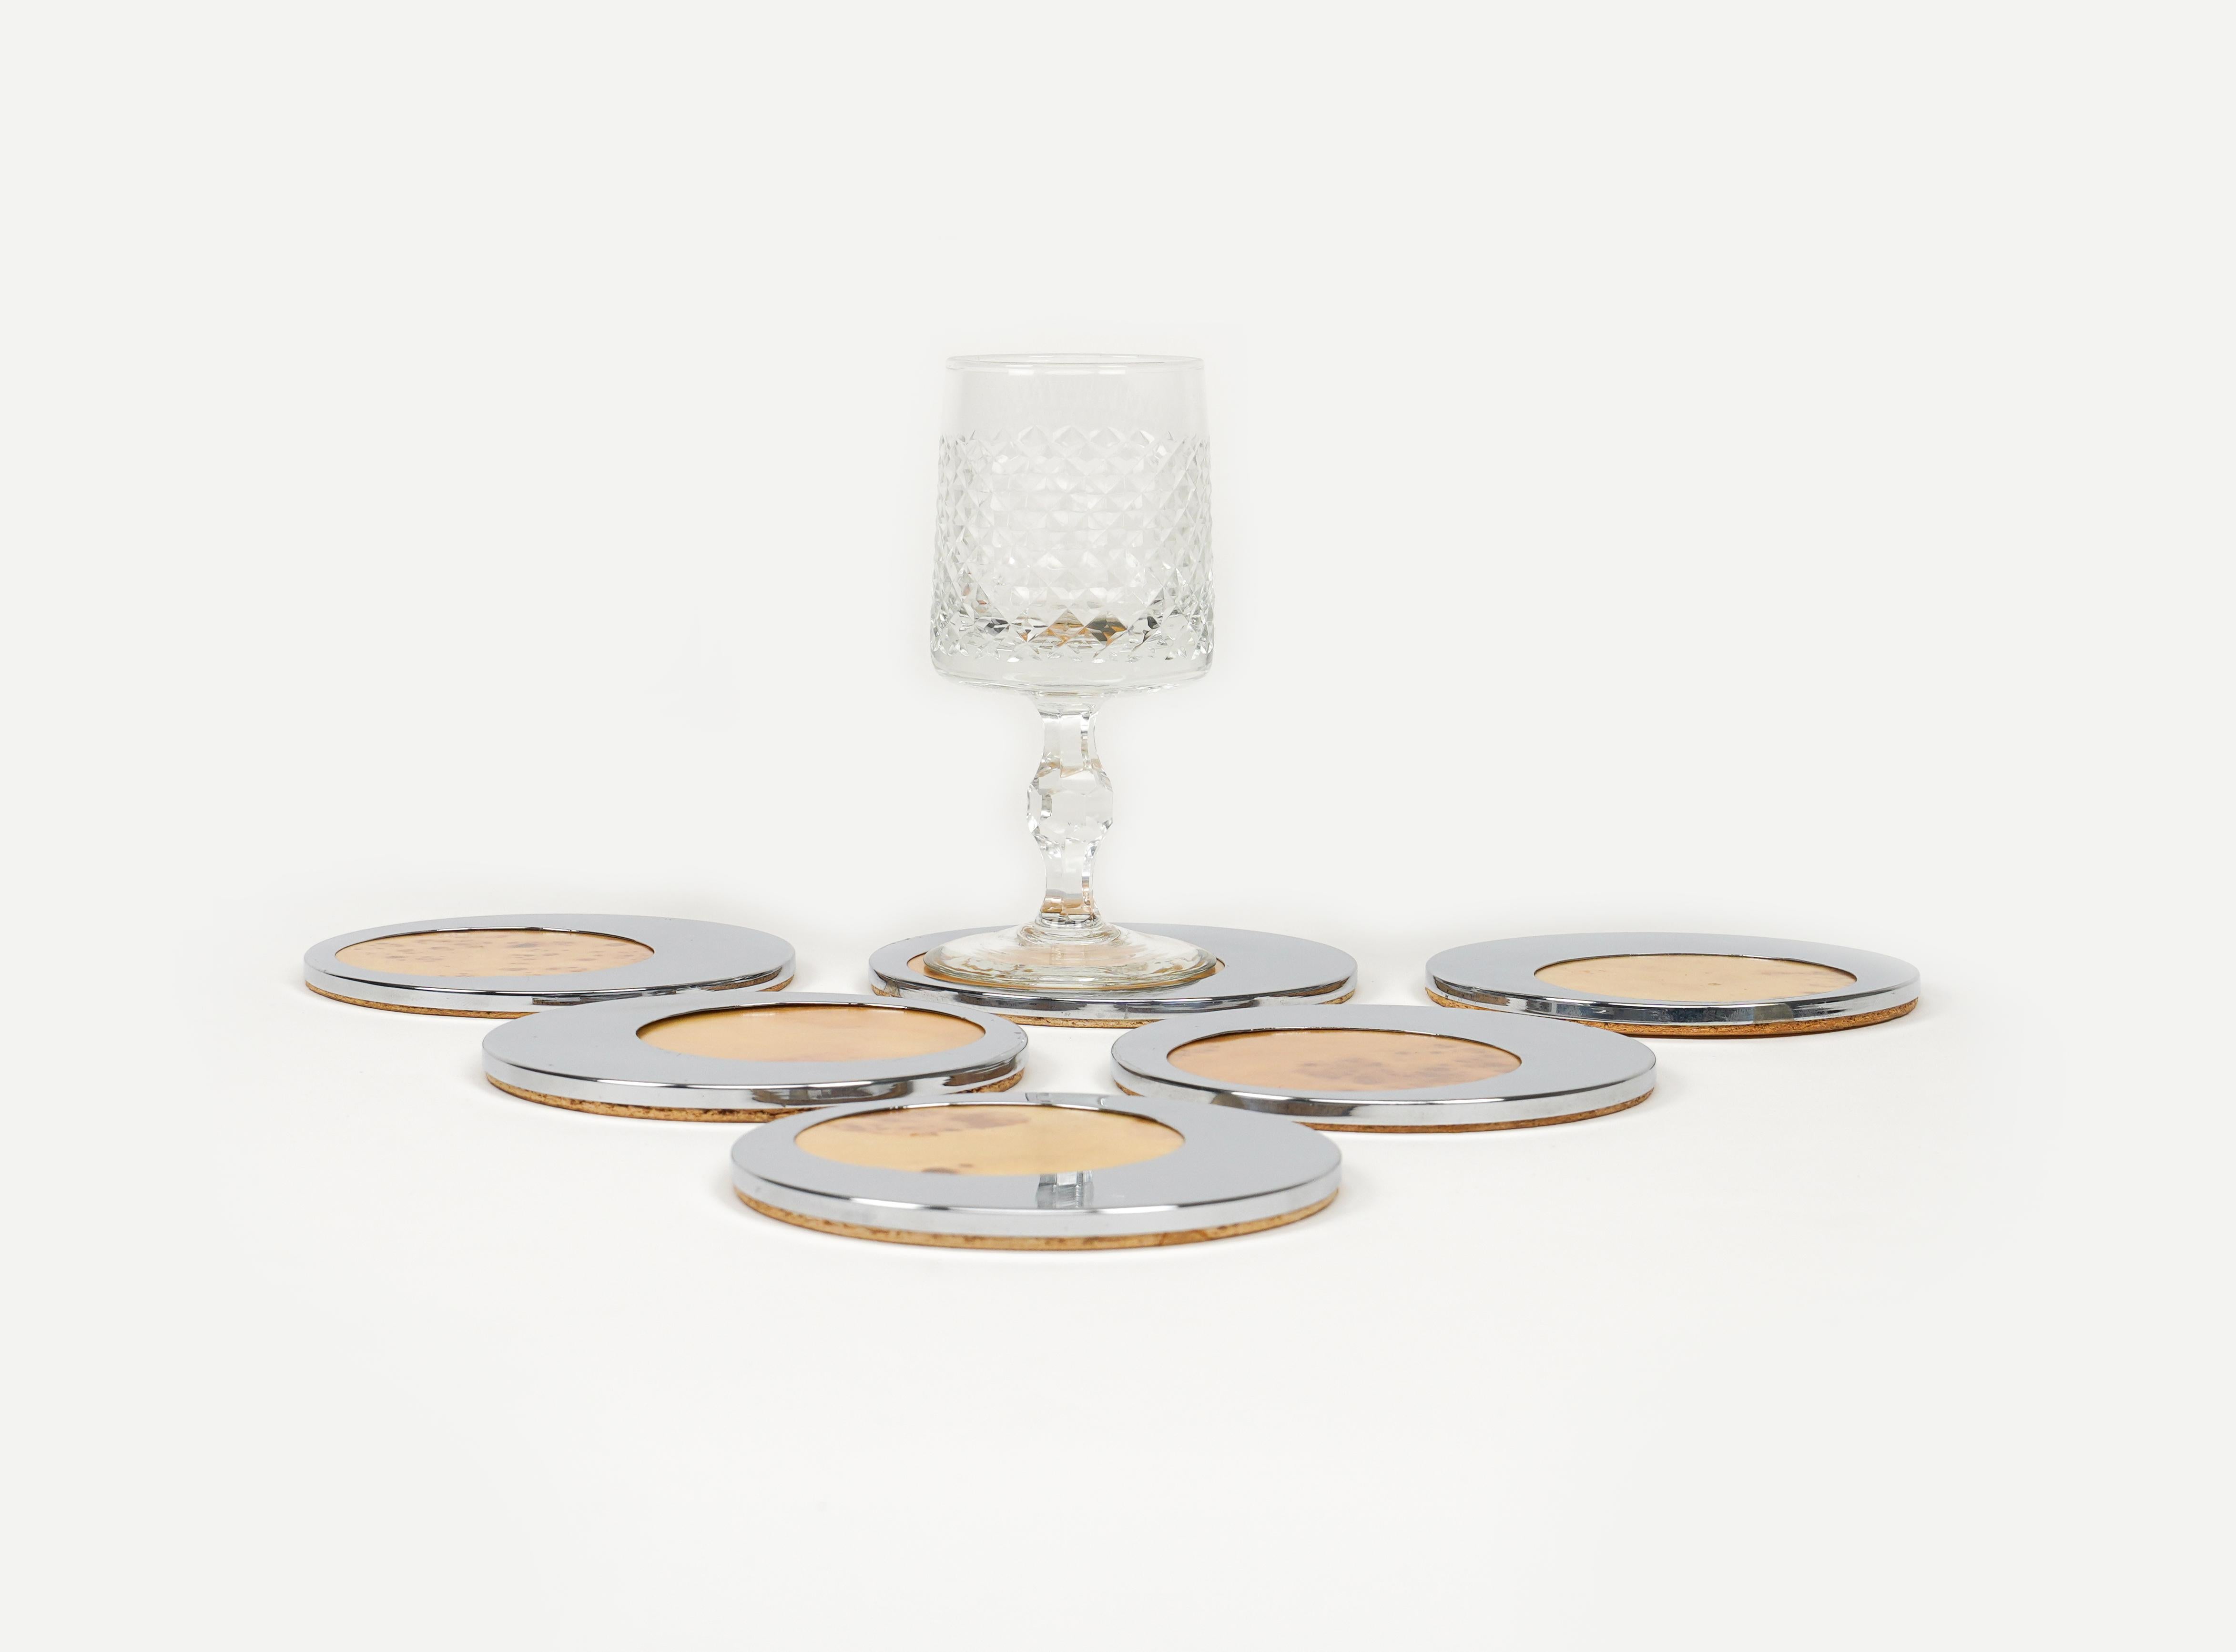 Midcentury Set of 6 Coasters in chrome and Wood  Willy Rizzo Style, Italy 1970s For Sale 3